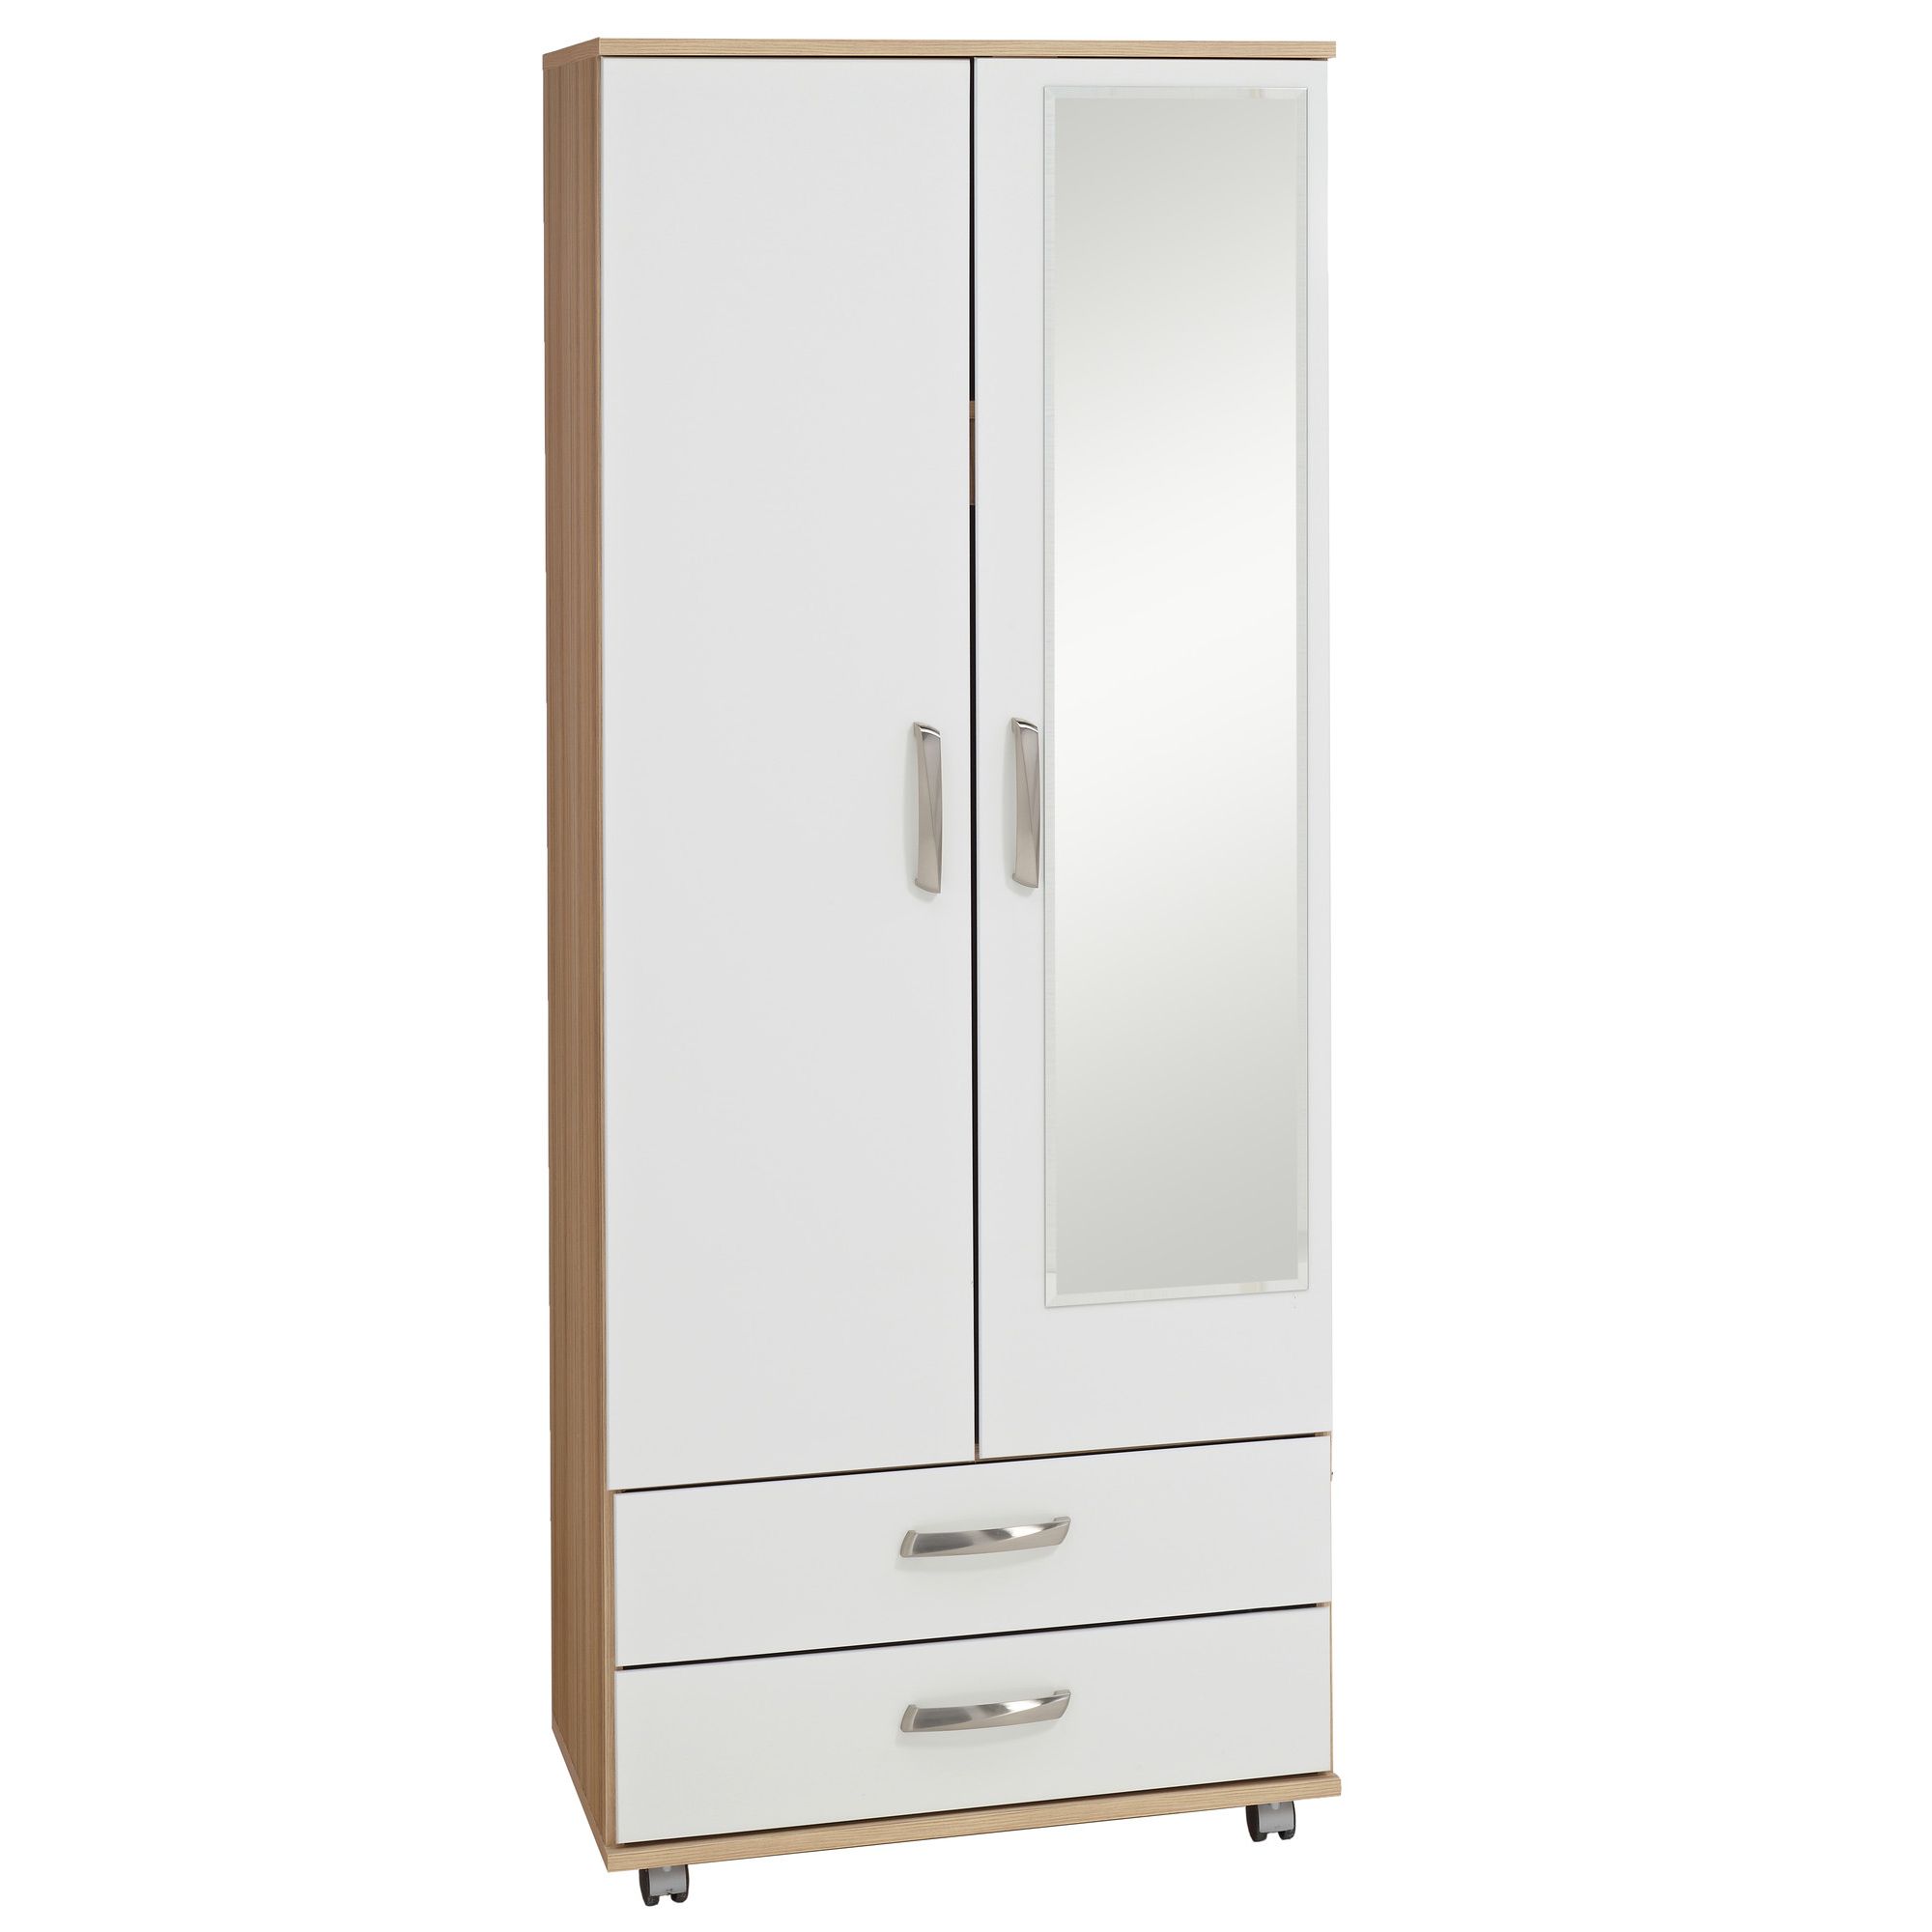 Ideal Furniture Regal 2 Doors Fitment in white at Tesco Direct